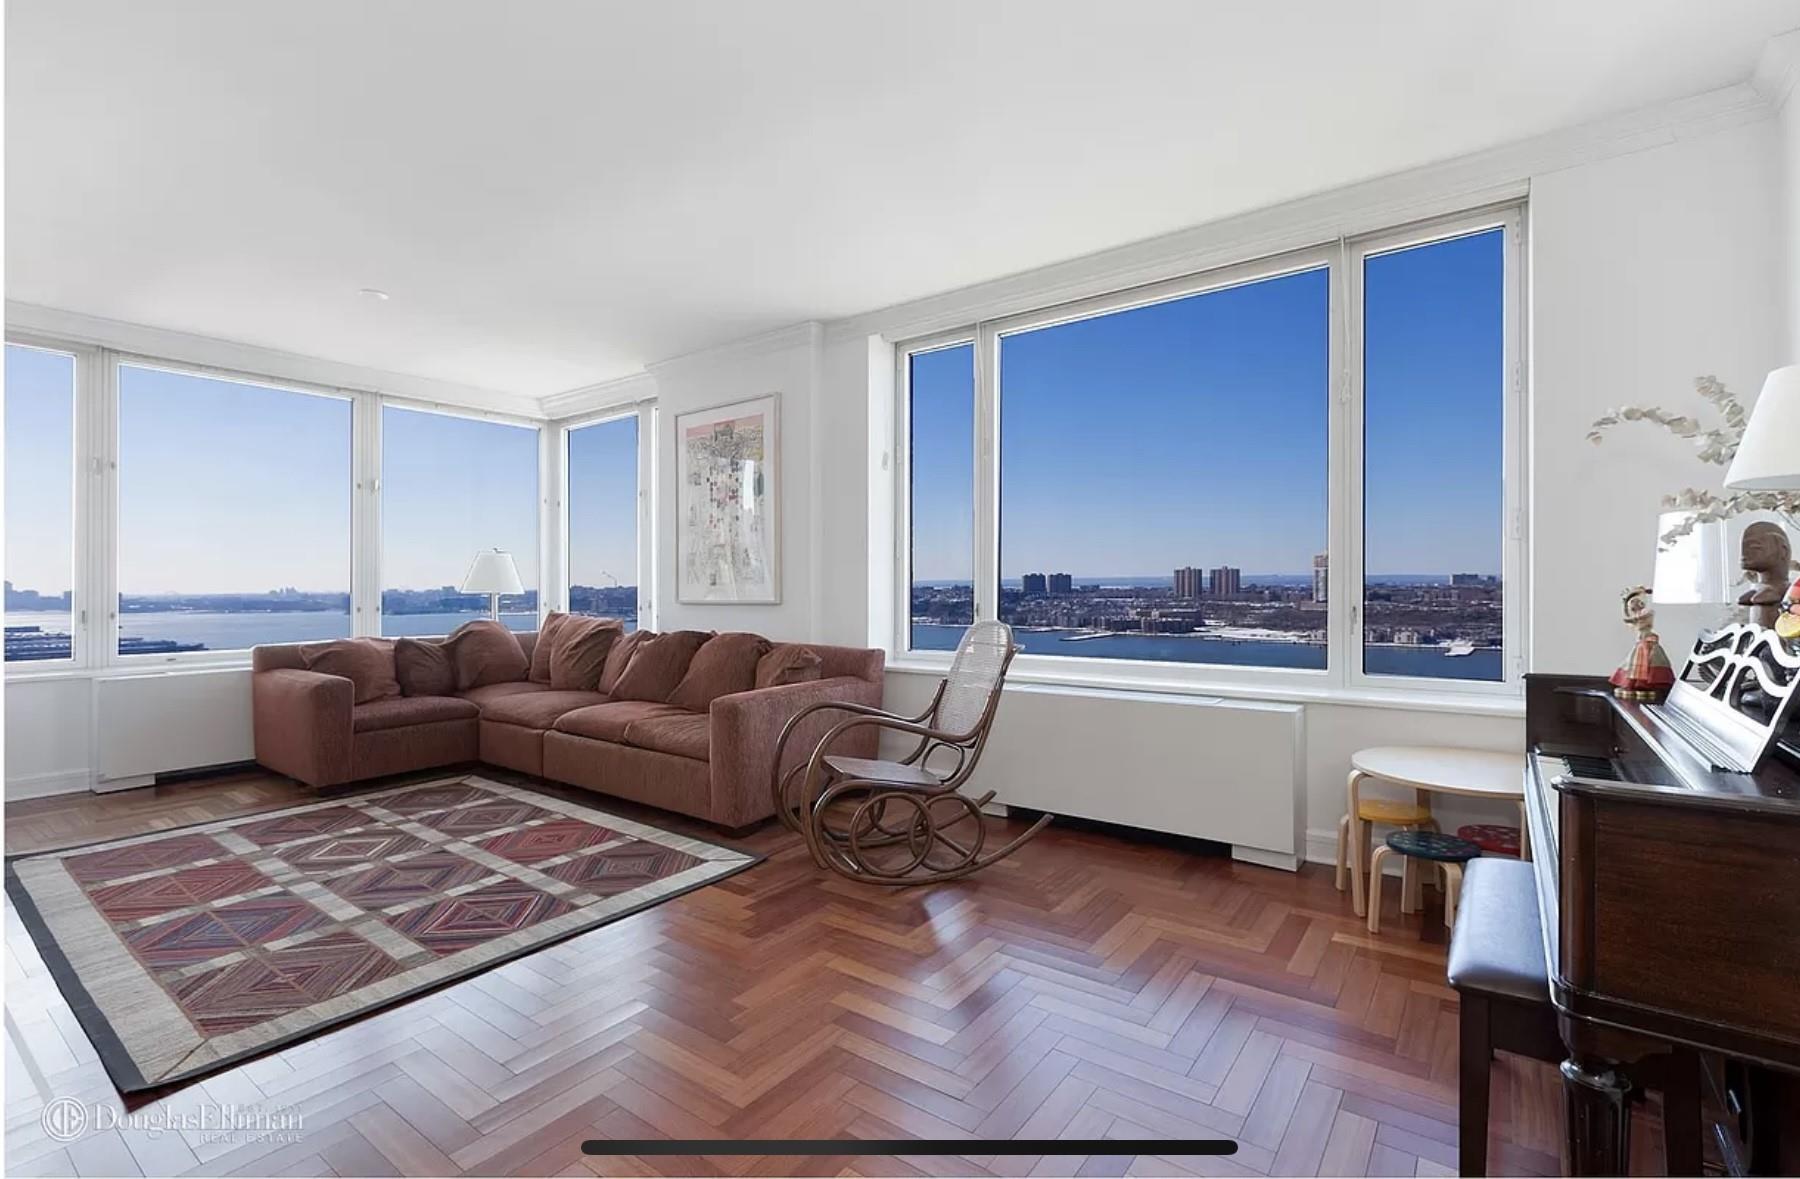 220 Riverside Boulevard 27G, Lincoln Sq, Upper West Side, NYC - 3 Bedrooms  
3 Bathrooms  
5 Rooms - 